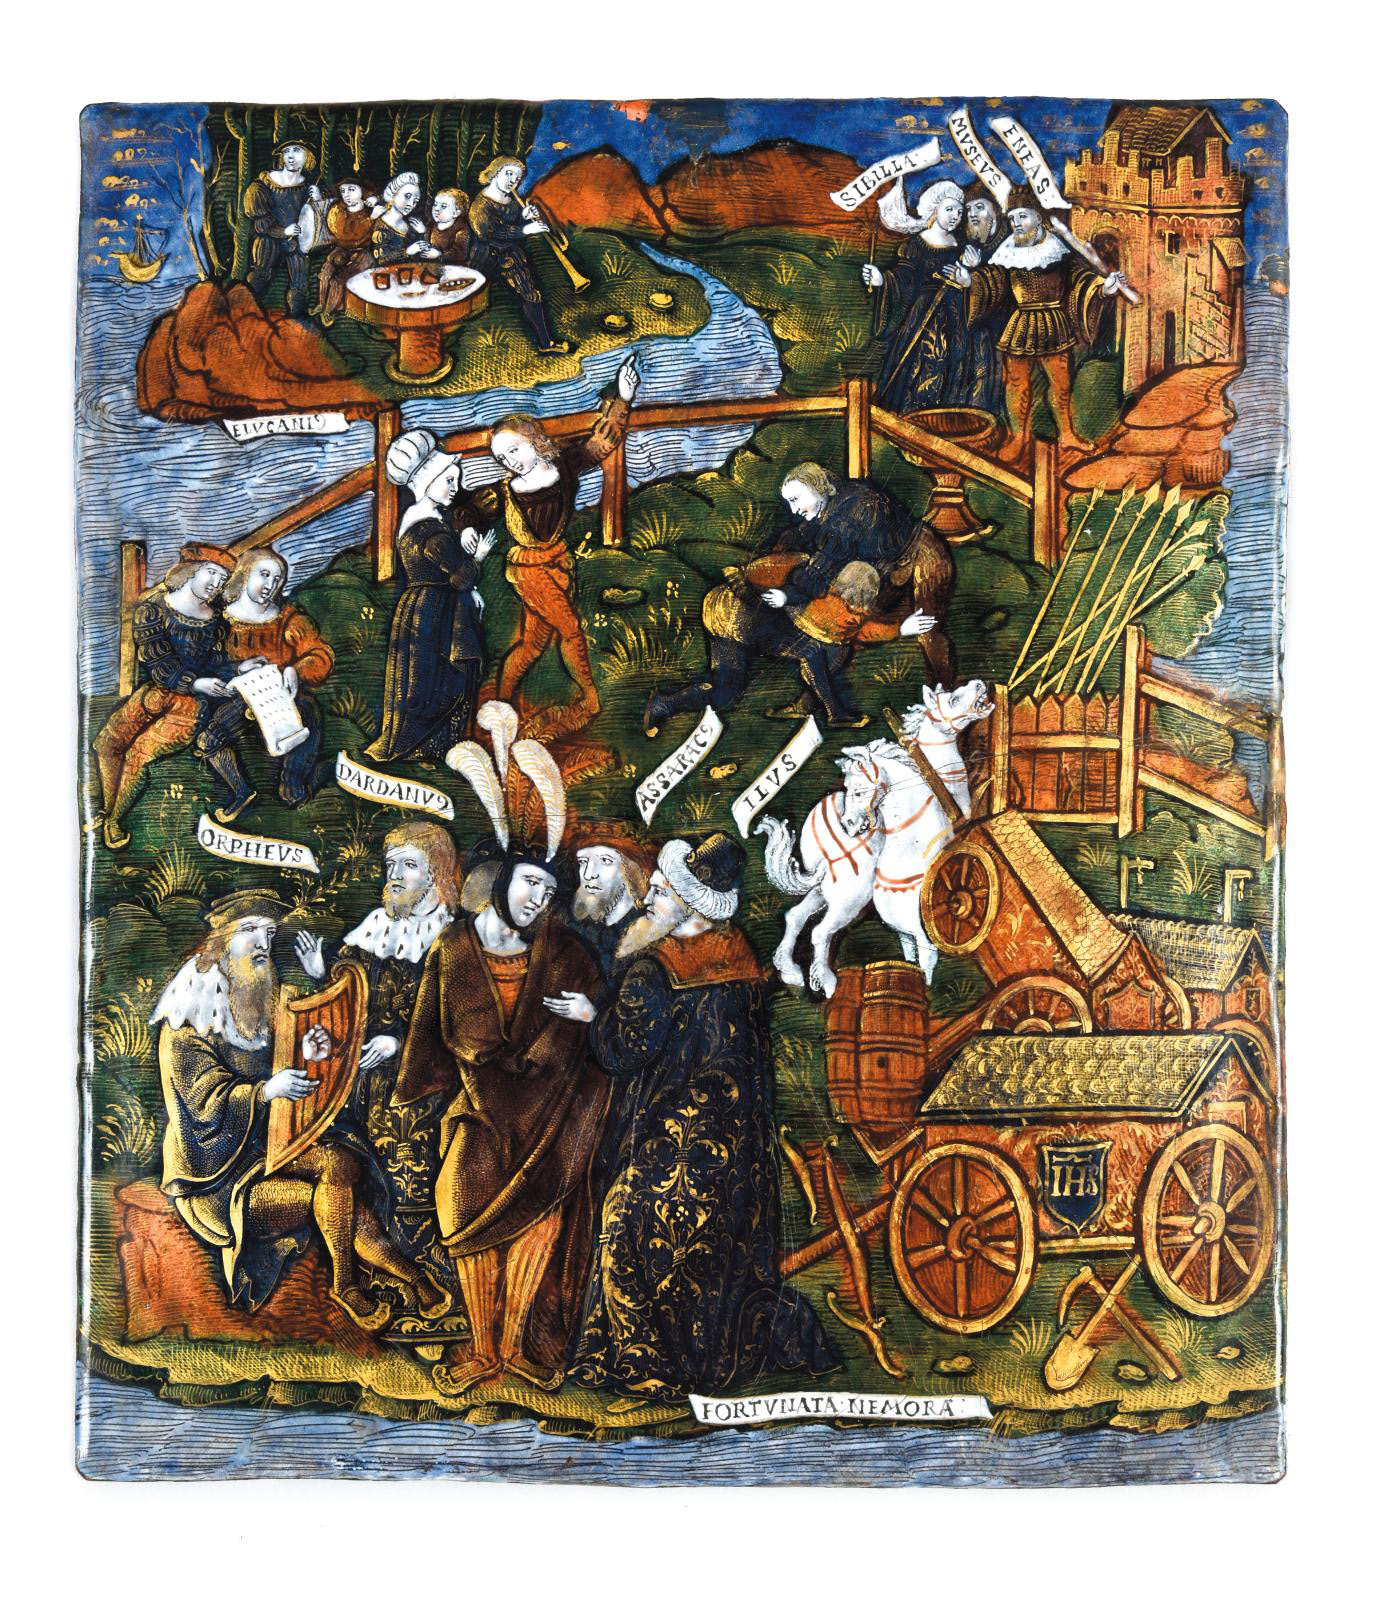 Master of the Aeneid, Limoges, c. 1525-1530. Les Bocages fortunés (The Rich Groves), enamel plate painted in polychrome on copper and silver flecks with gilt highlights, gilt calf frame, crimson velvet interior (French work from the first half of the 17th century), the plaque measuring 22.5 x 19.8 cm/8.9 x 7.8 in. Estimate: €200,000/300,000